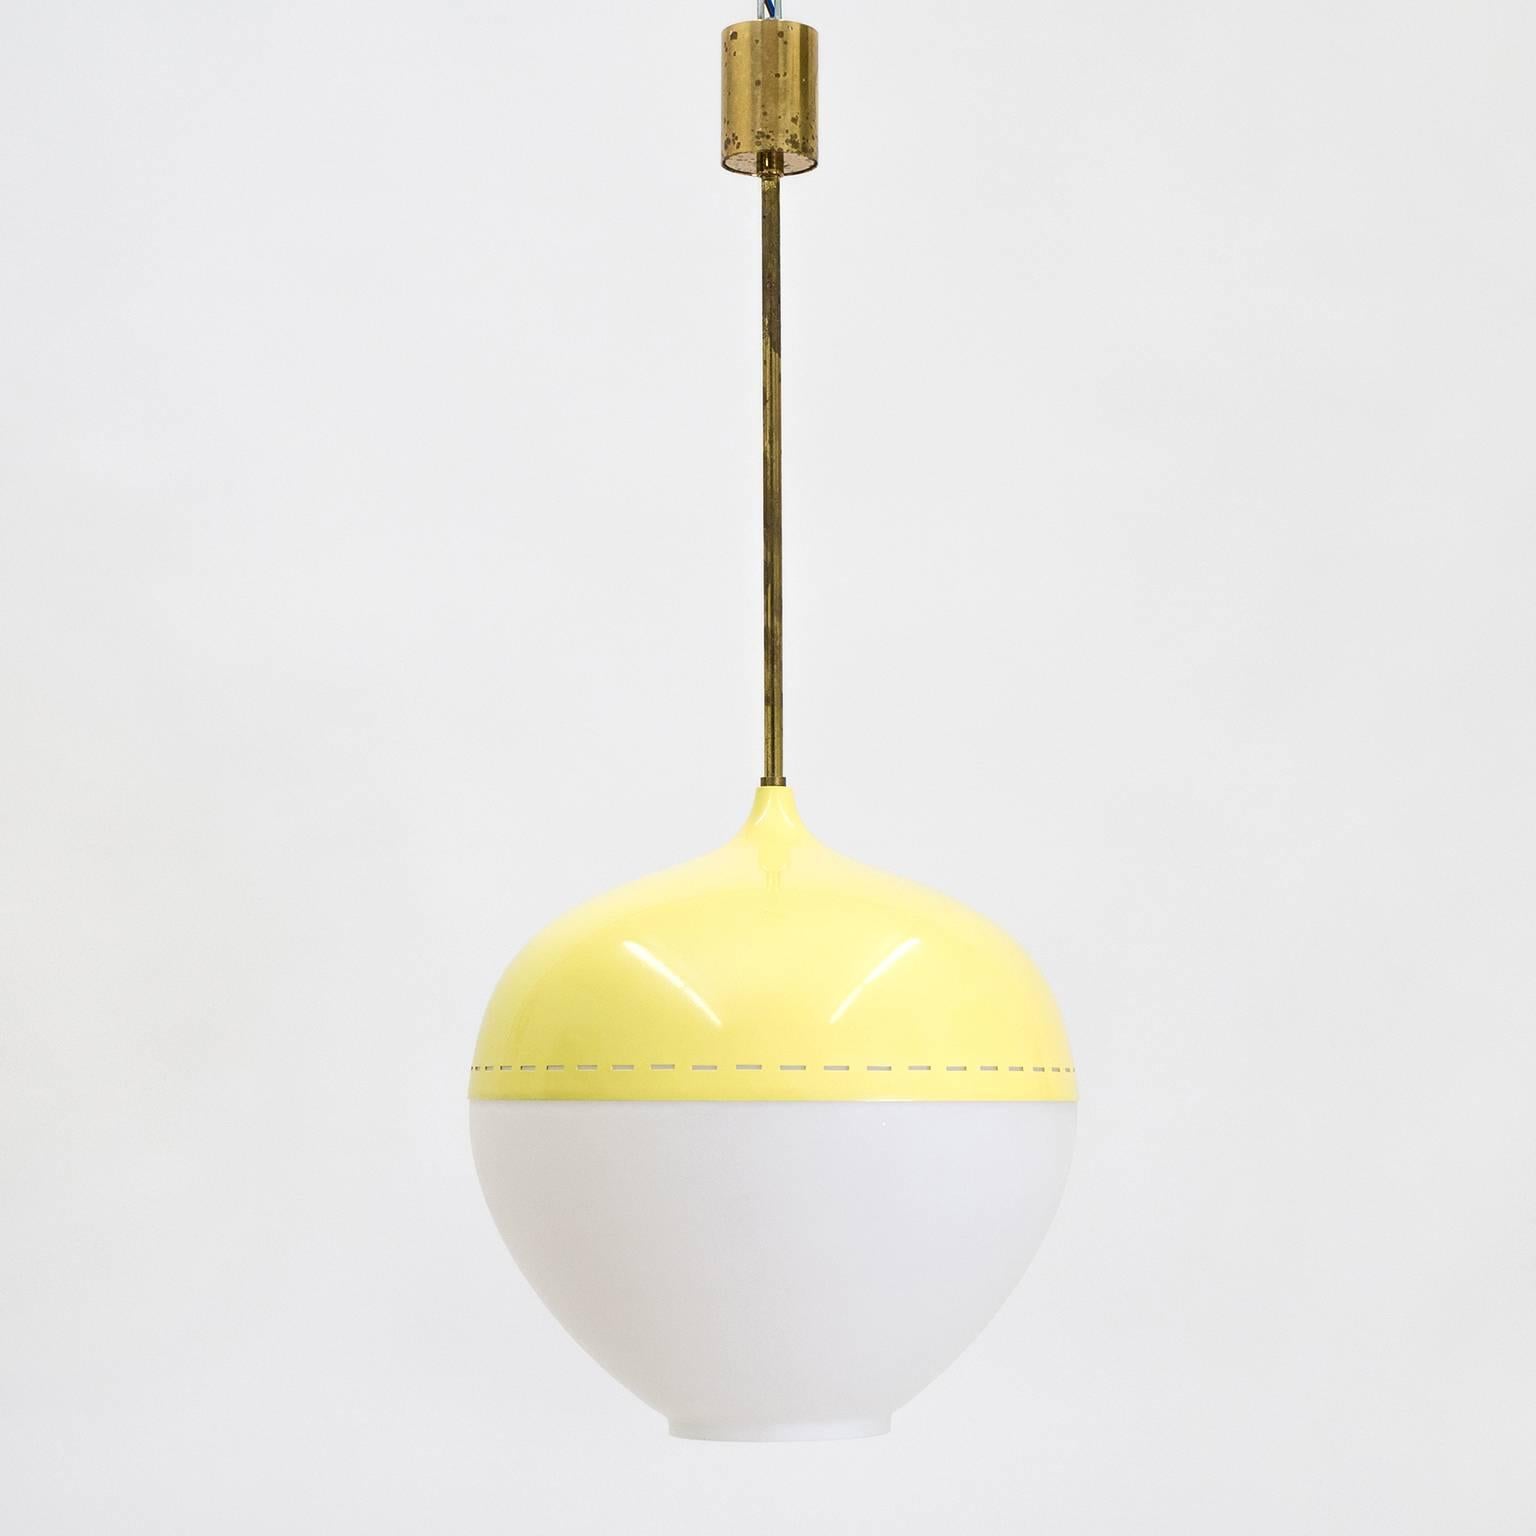 Rare Stilnovo pendant from the 1950s. A large onion shaped satin glass globe is partially covered by a pierced and lacquered aluminum shade and mounted on brass hardware. The shade has a pastel yellow color with linear piercings along the edge for a